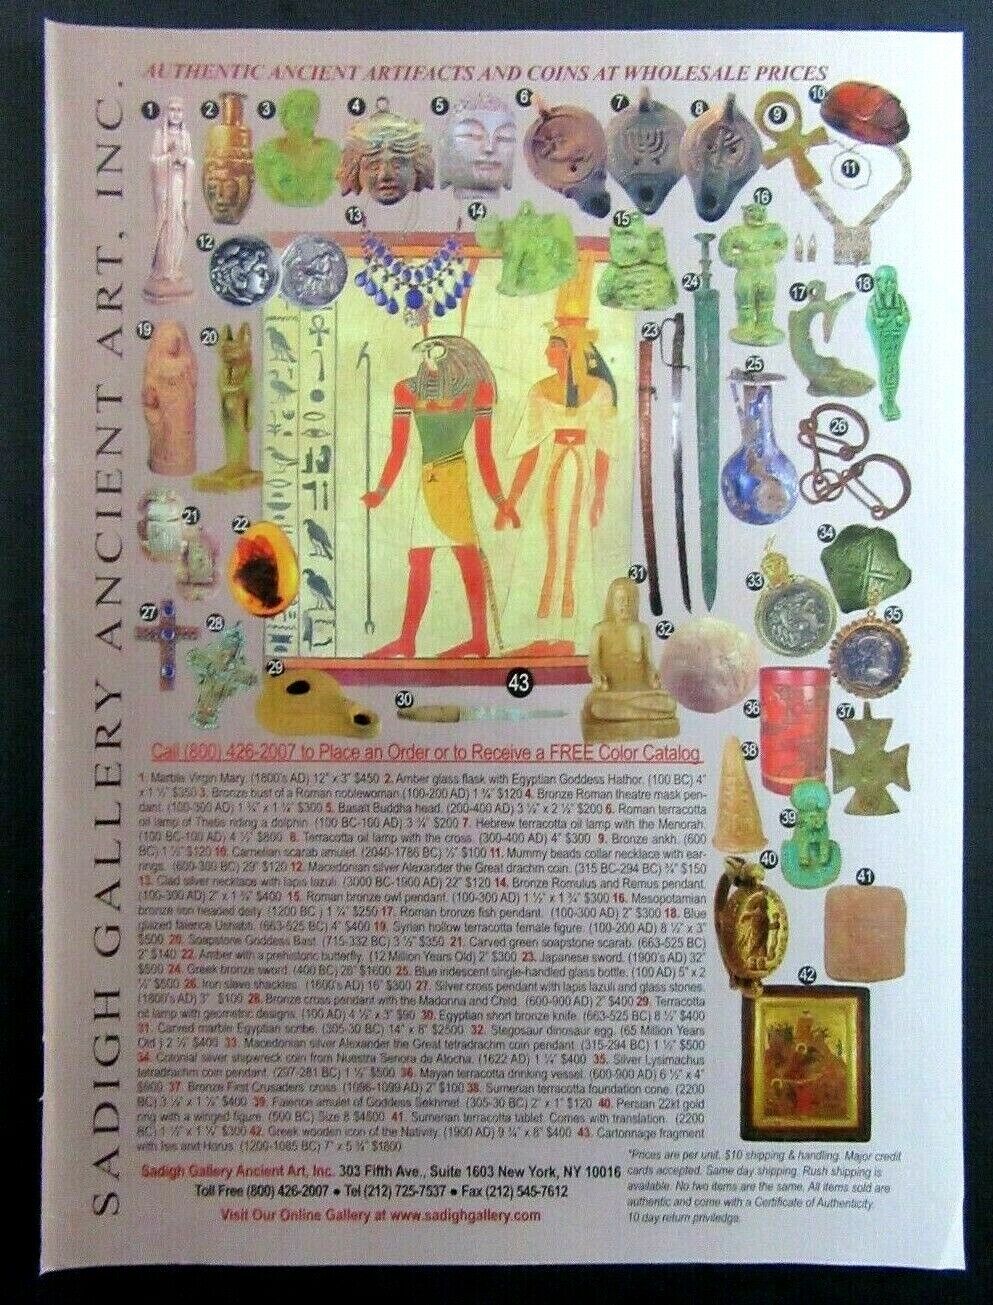 2011 SADIGH GALLERY Ancient Artifacts & Coins at Wholesale Prices Magazine Ad